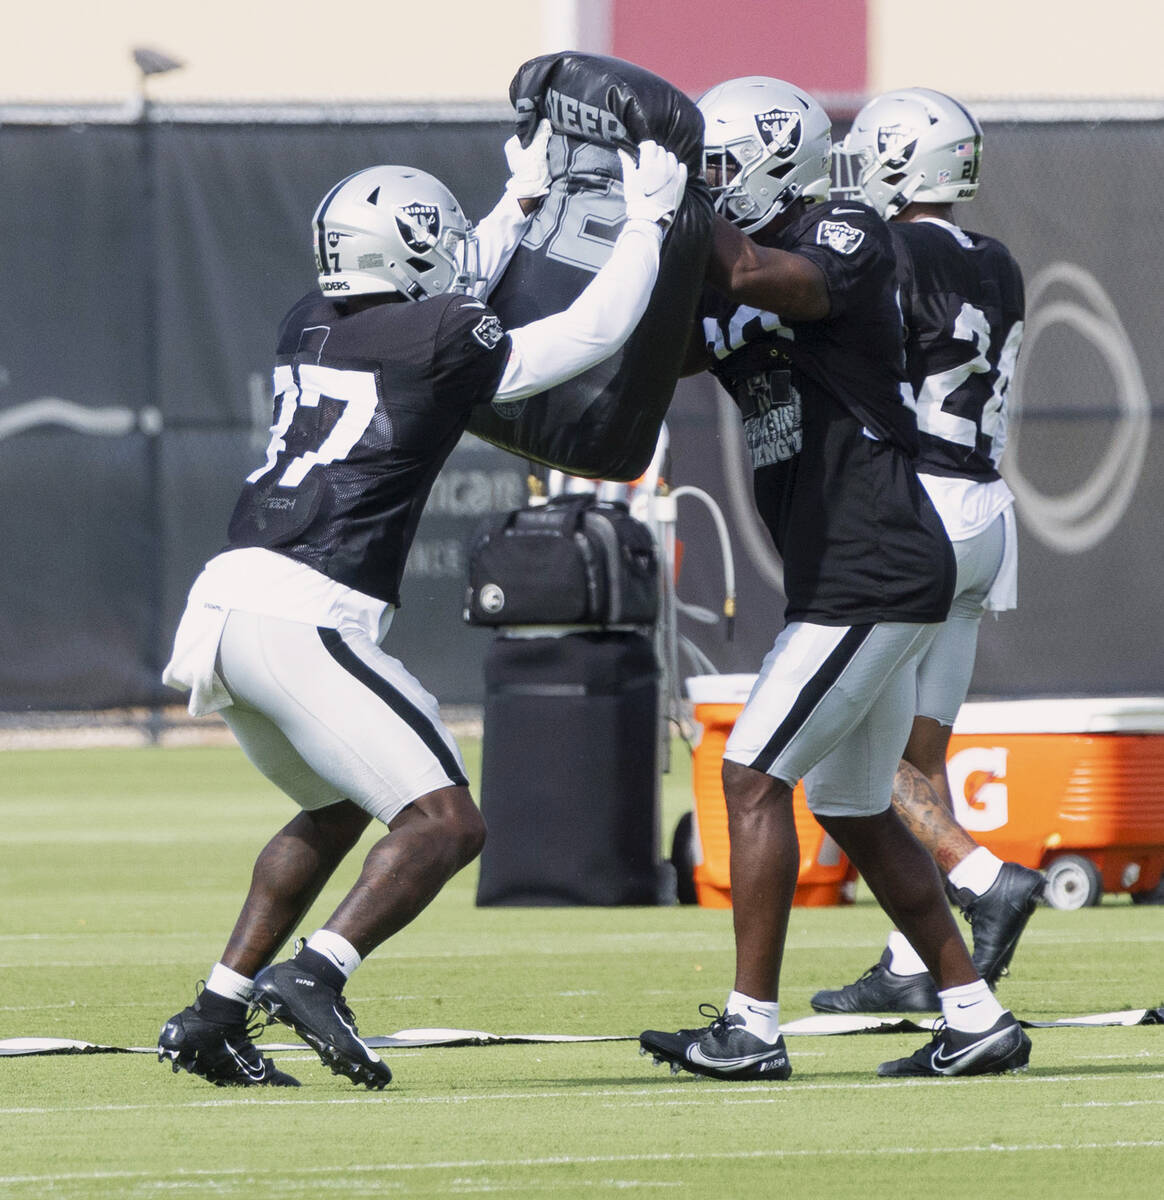 Raiders safety Tyree Gillespie (37) and safety Duron Harmon (30) drill together during the team ...